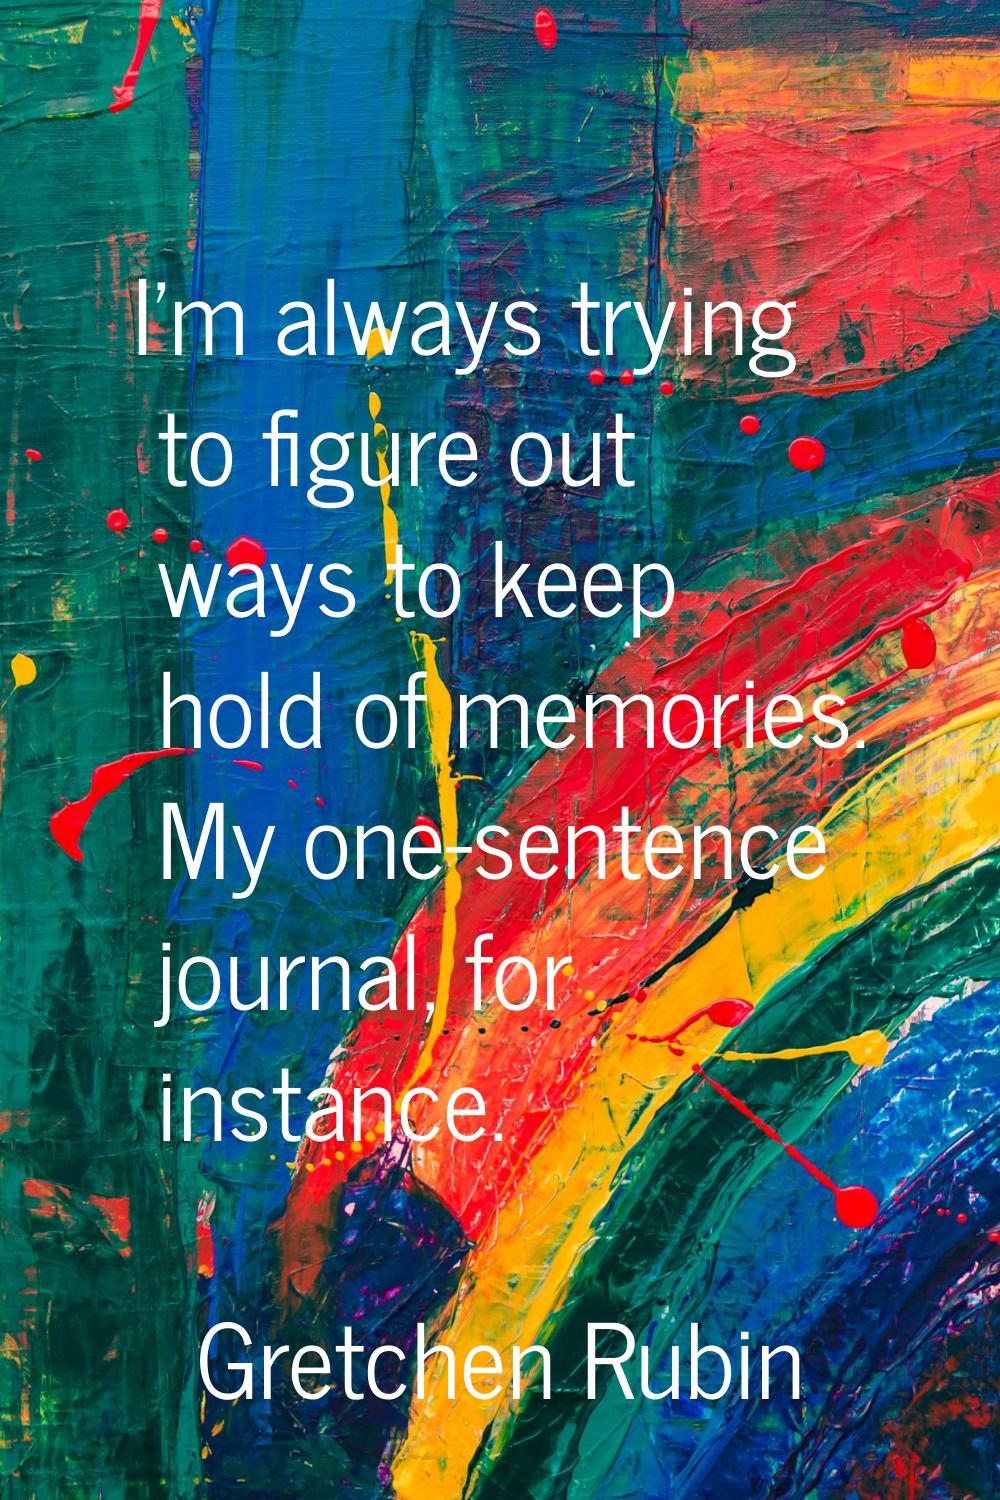 I'm always trying to figure out ways to keep hold of memories. My one-sentence journal, for instanc